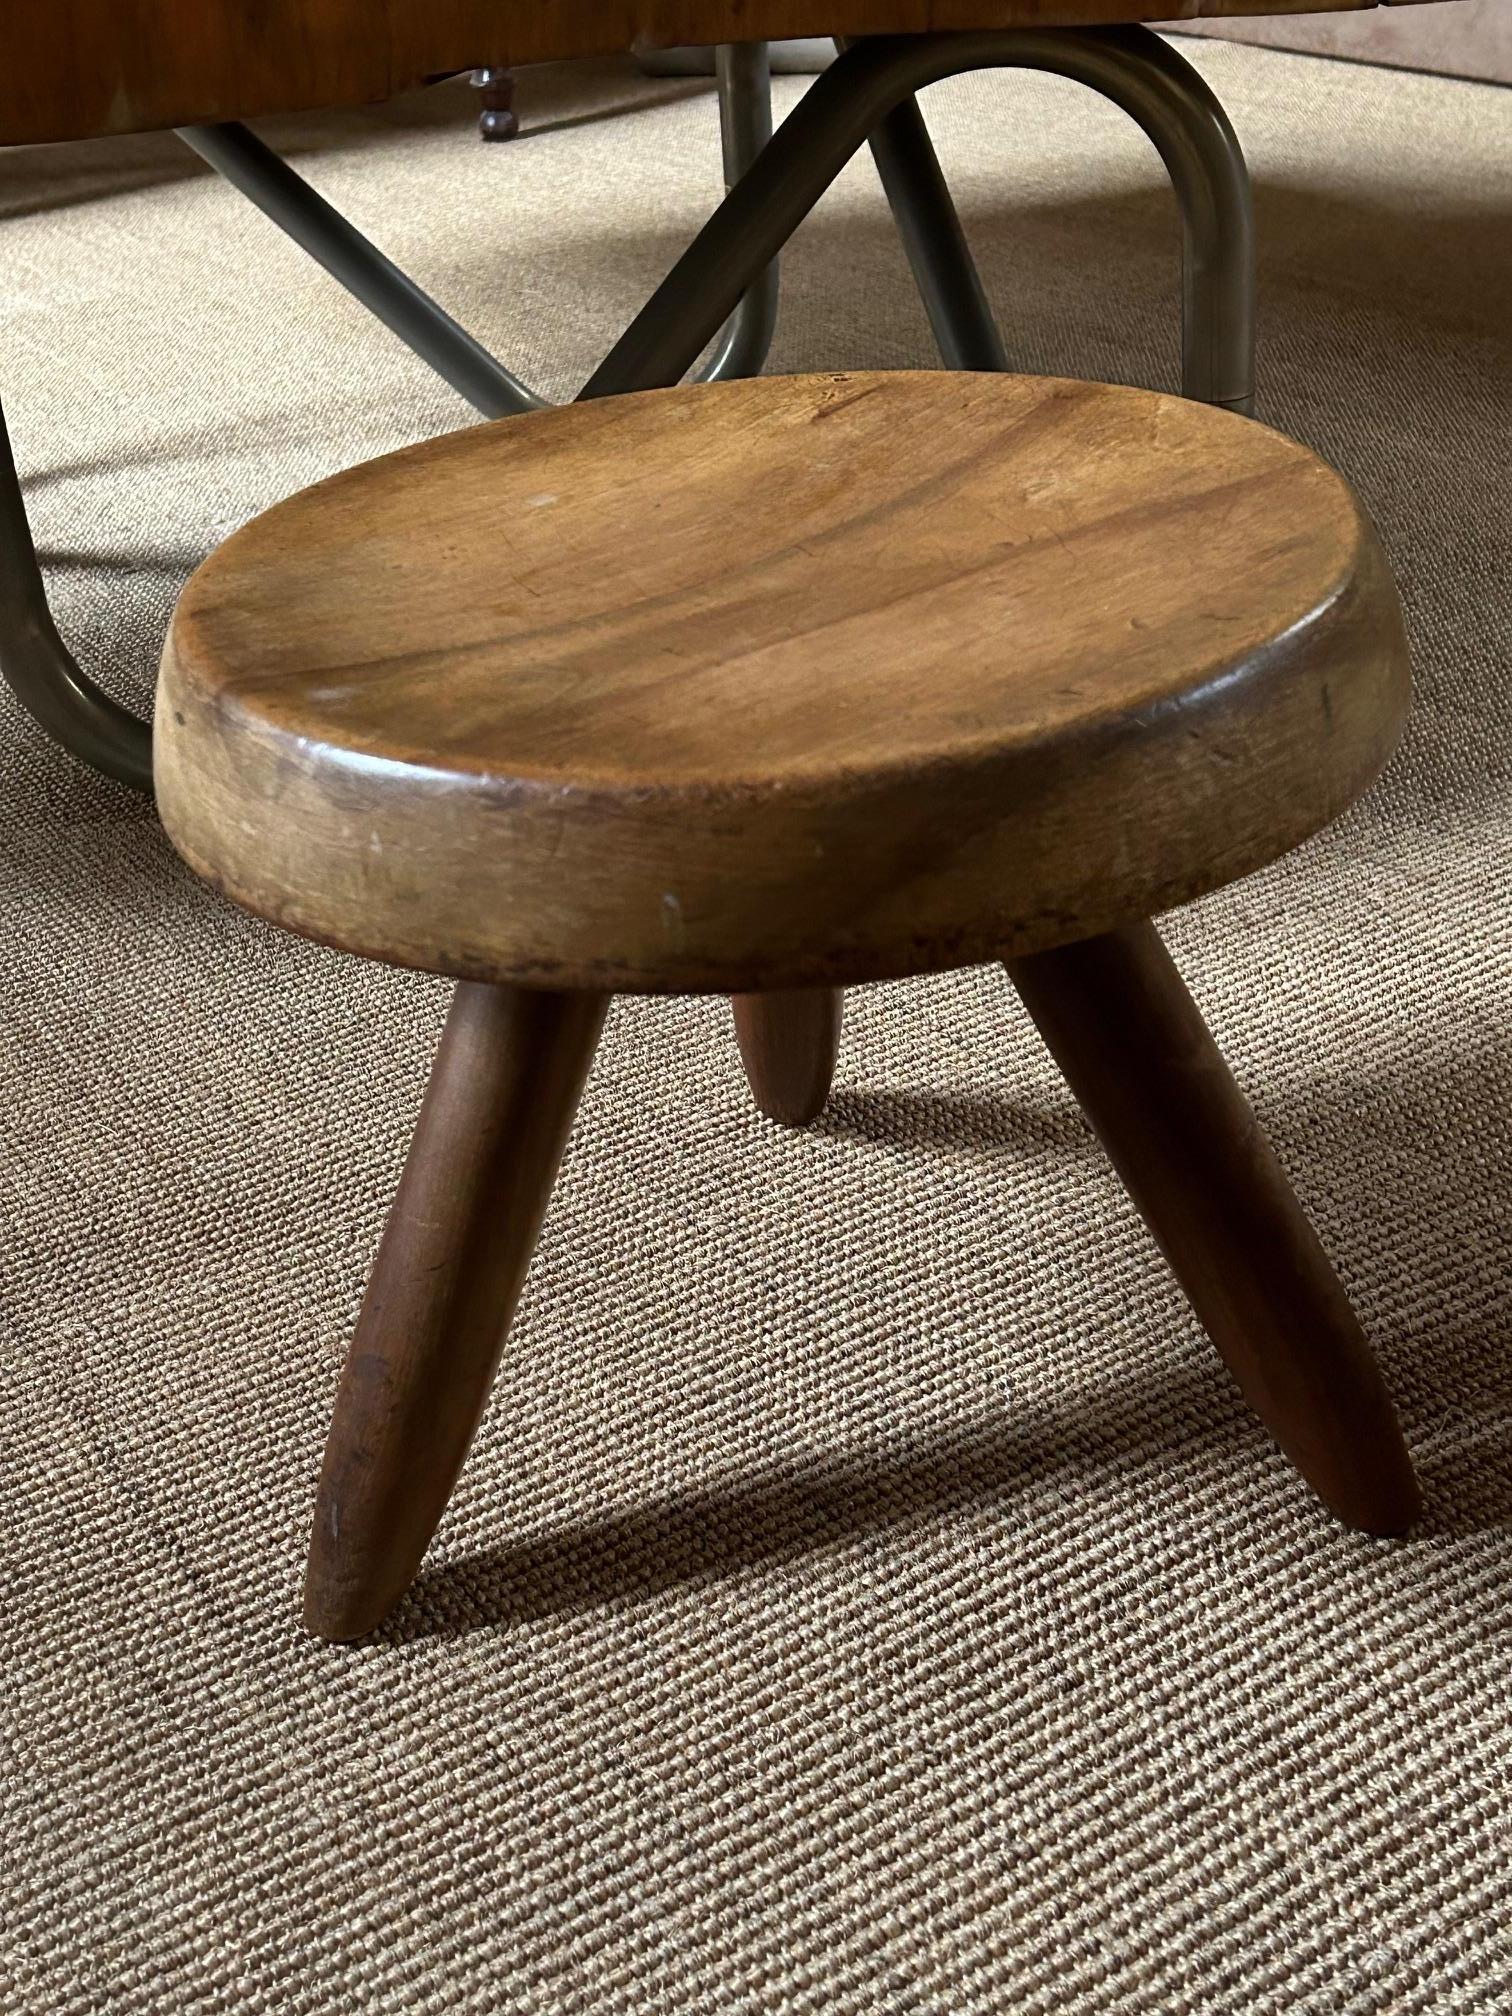 Mahogany Berger stool by Charlotte Perriand In Good Condition For Sale In Paris, FR